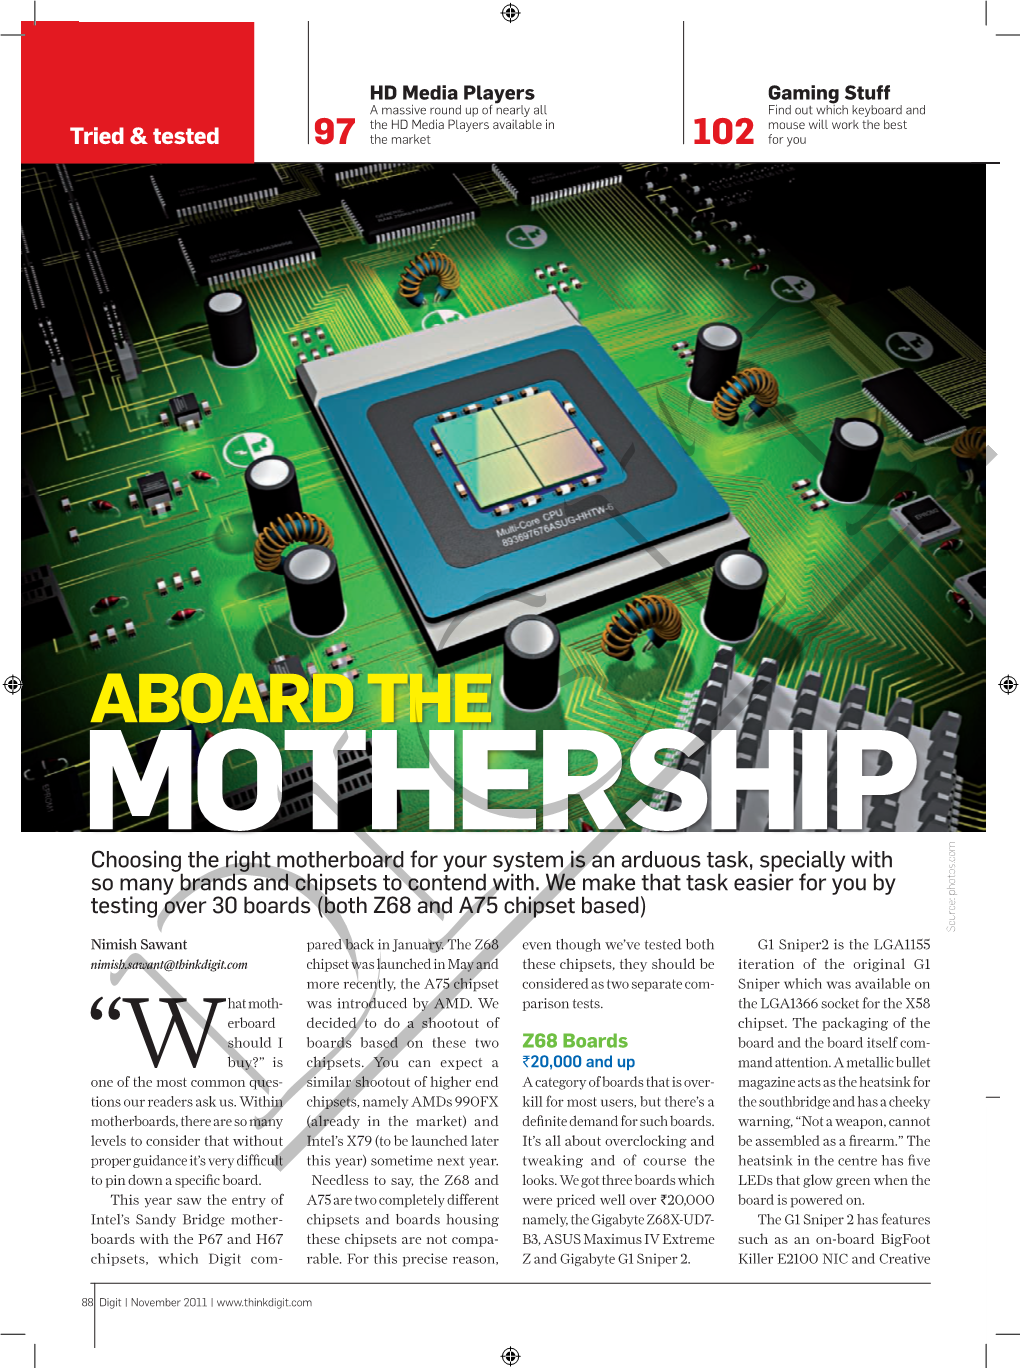 Aboard the Mothership Choosing the Right Motherboard for Your System Is an Arduous Task, Specially with So Many Brands and Chipsets to Contend With